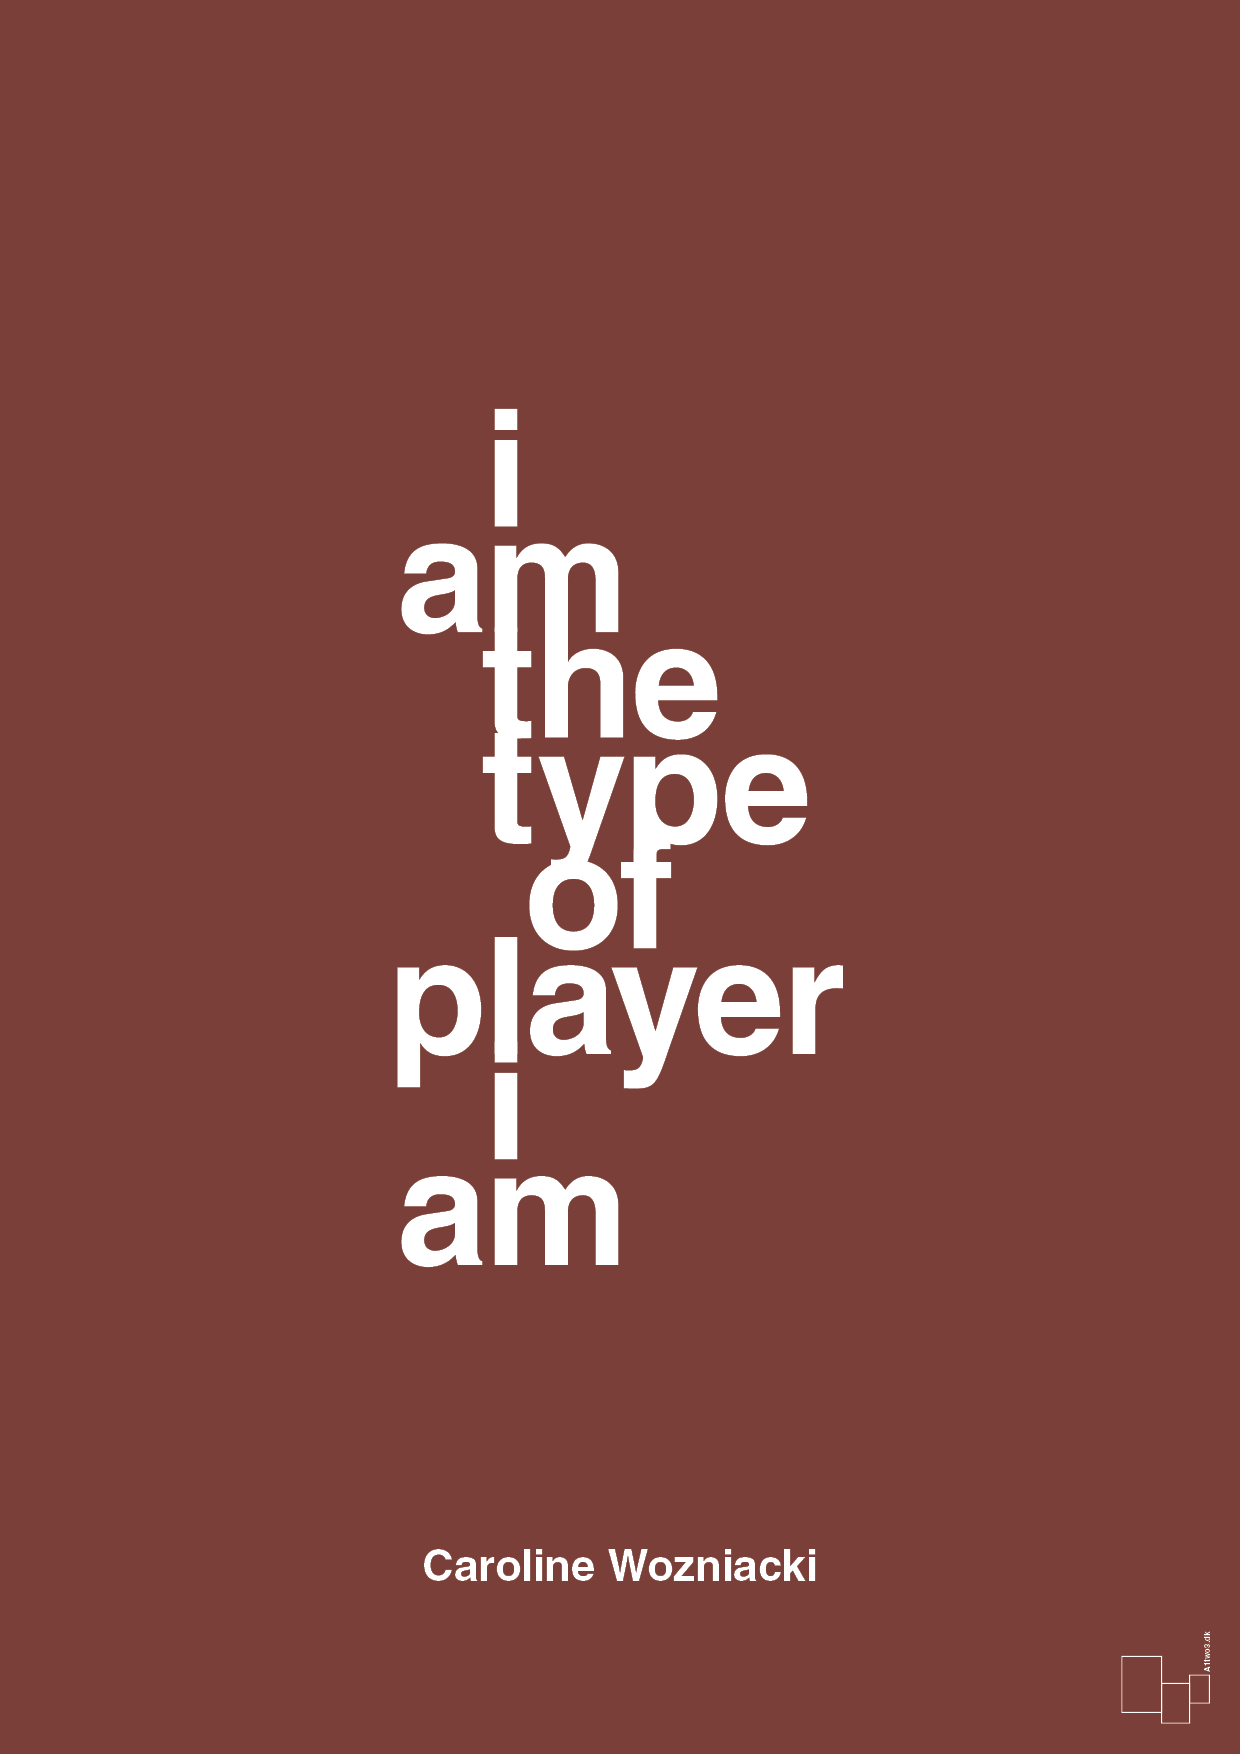 i am the type of player i am - Plakat med Citater i Red Pepper